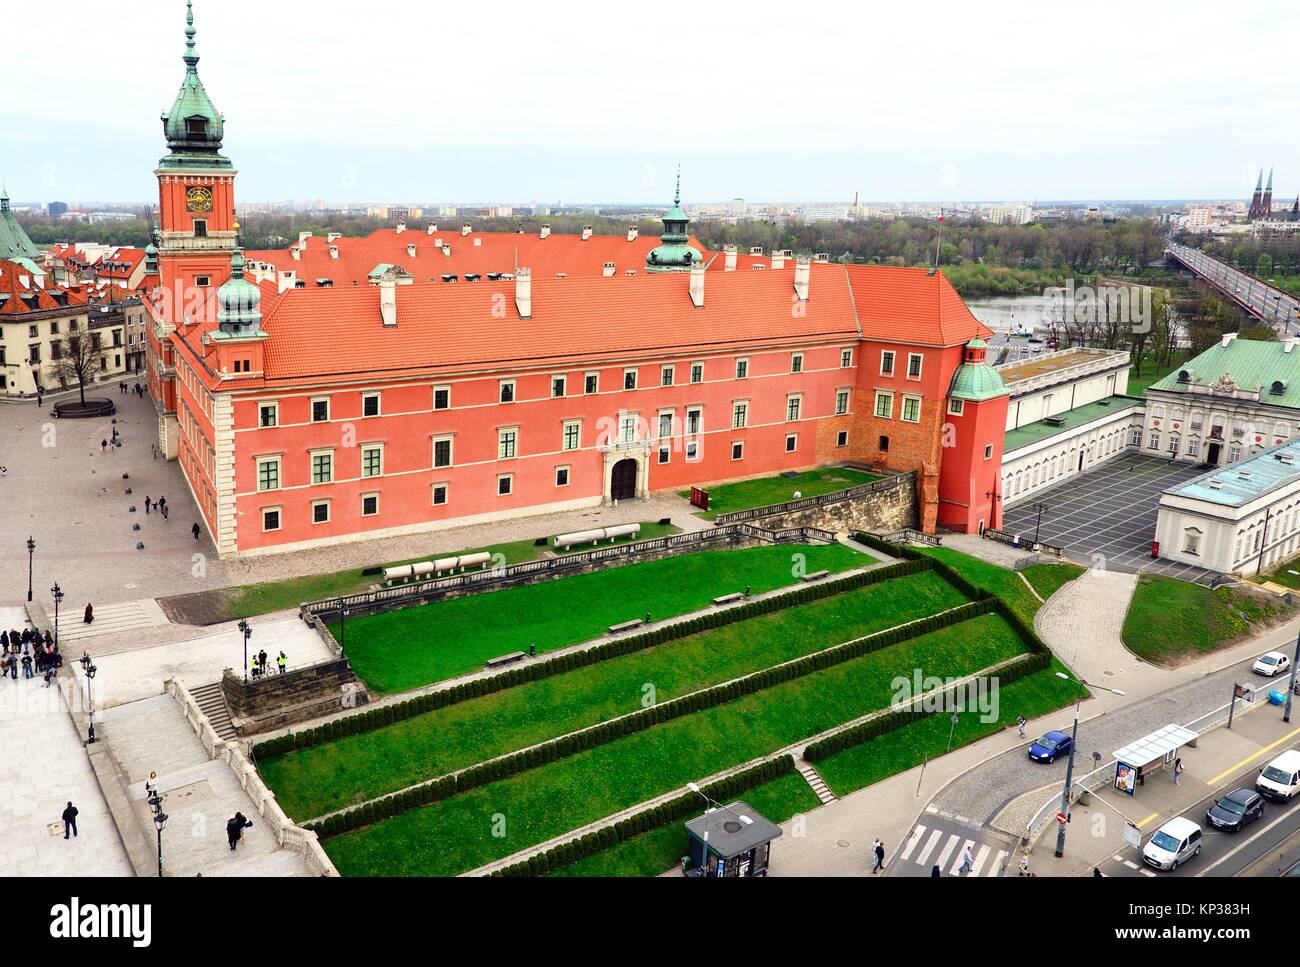 Royal Castle - former official residence of Polish monarchs, on right with  green roof - Palac pod Blacha - Copper Roof Palace, in far background Stock  Photo - Alamy